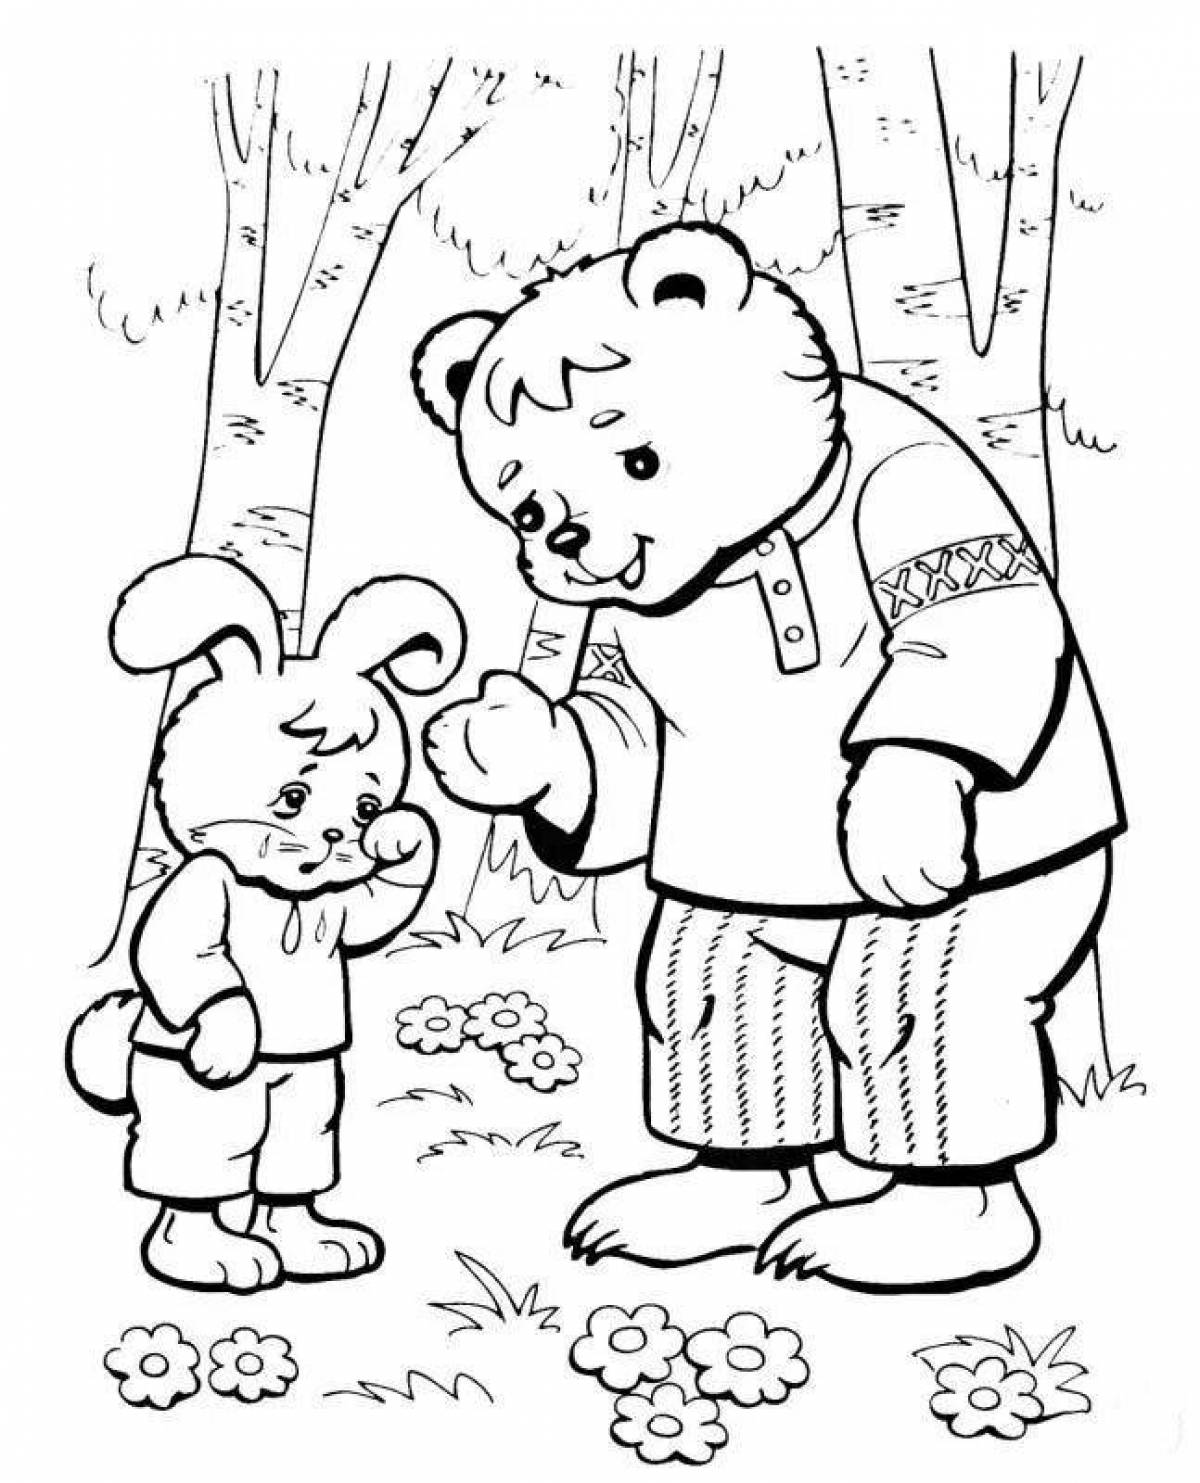 Coloring book playful bear and fox